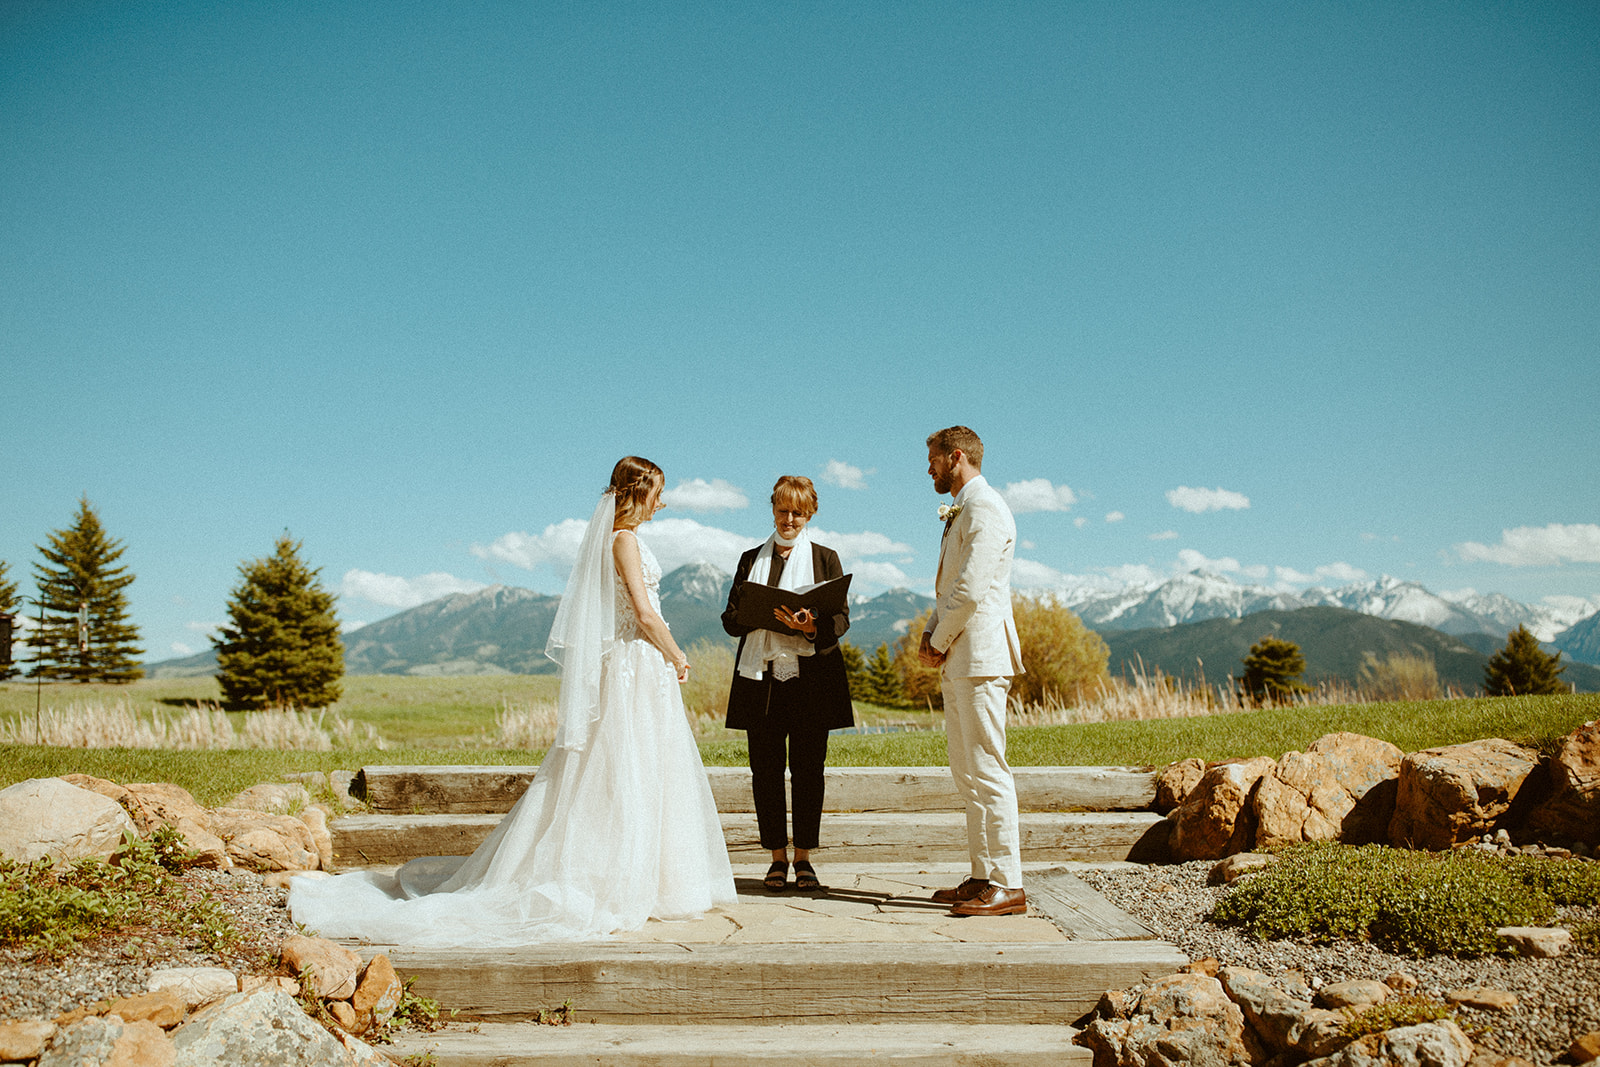 An officiant marries a bride and groom with a mountain landscape in the background.